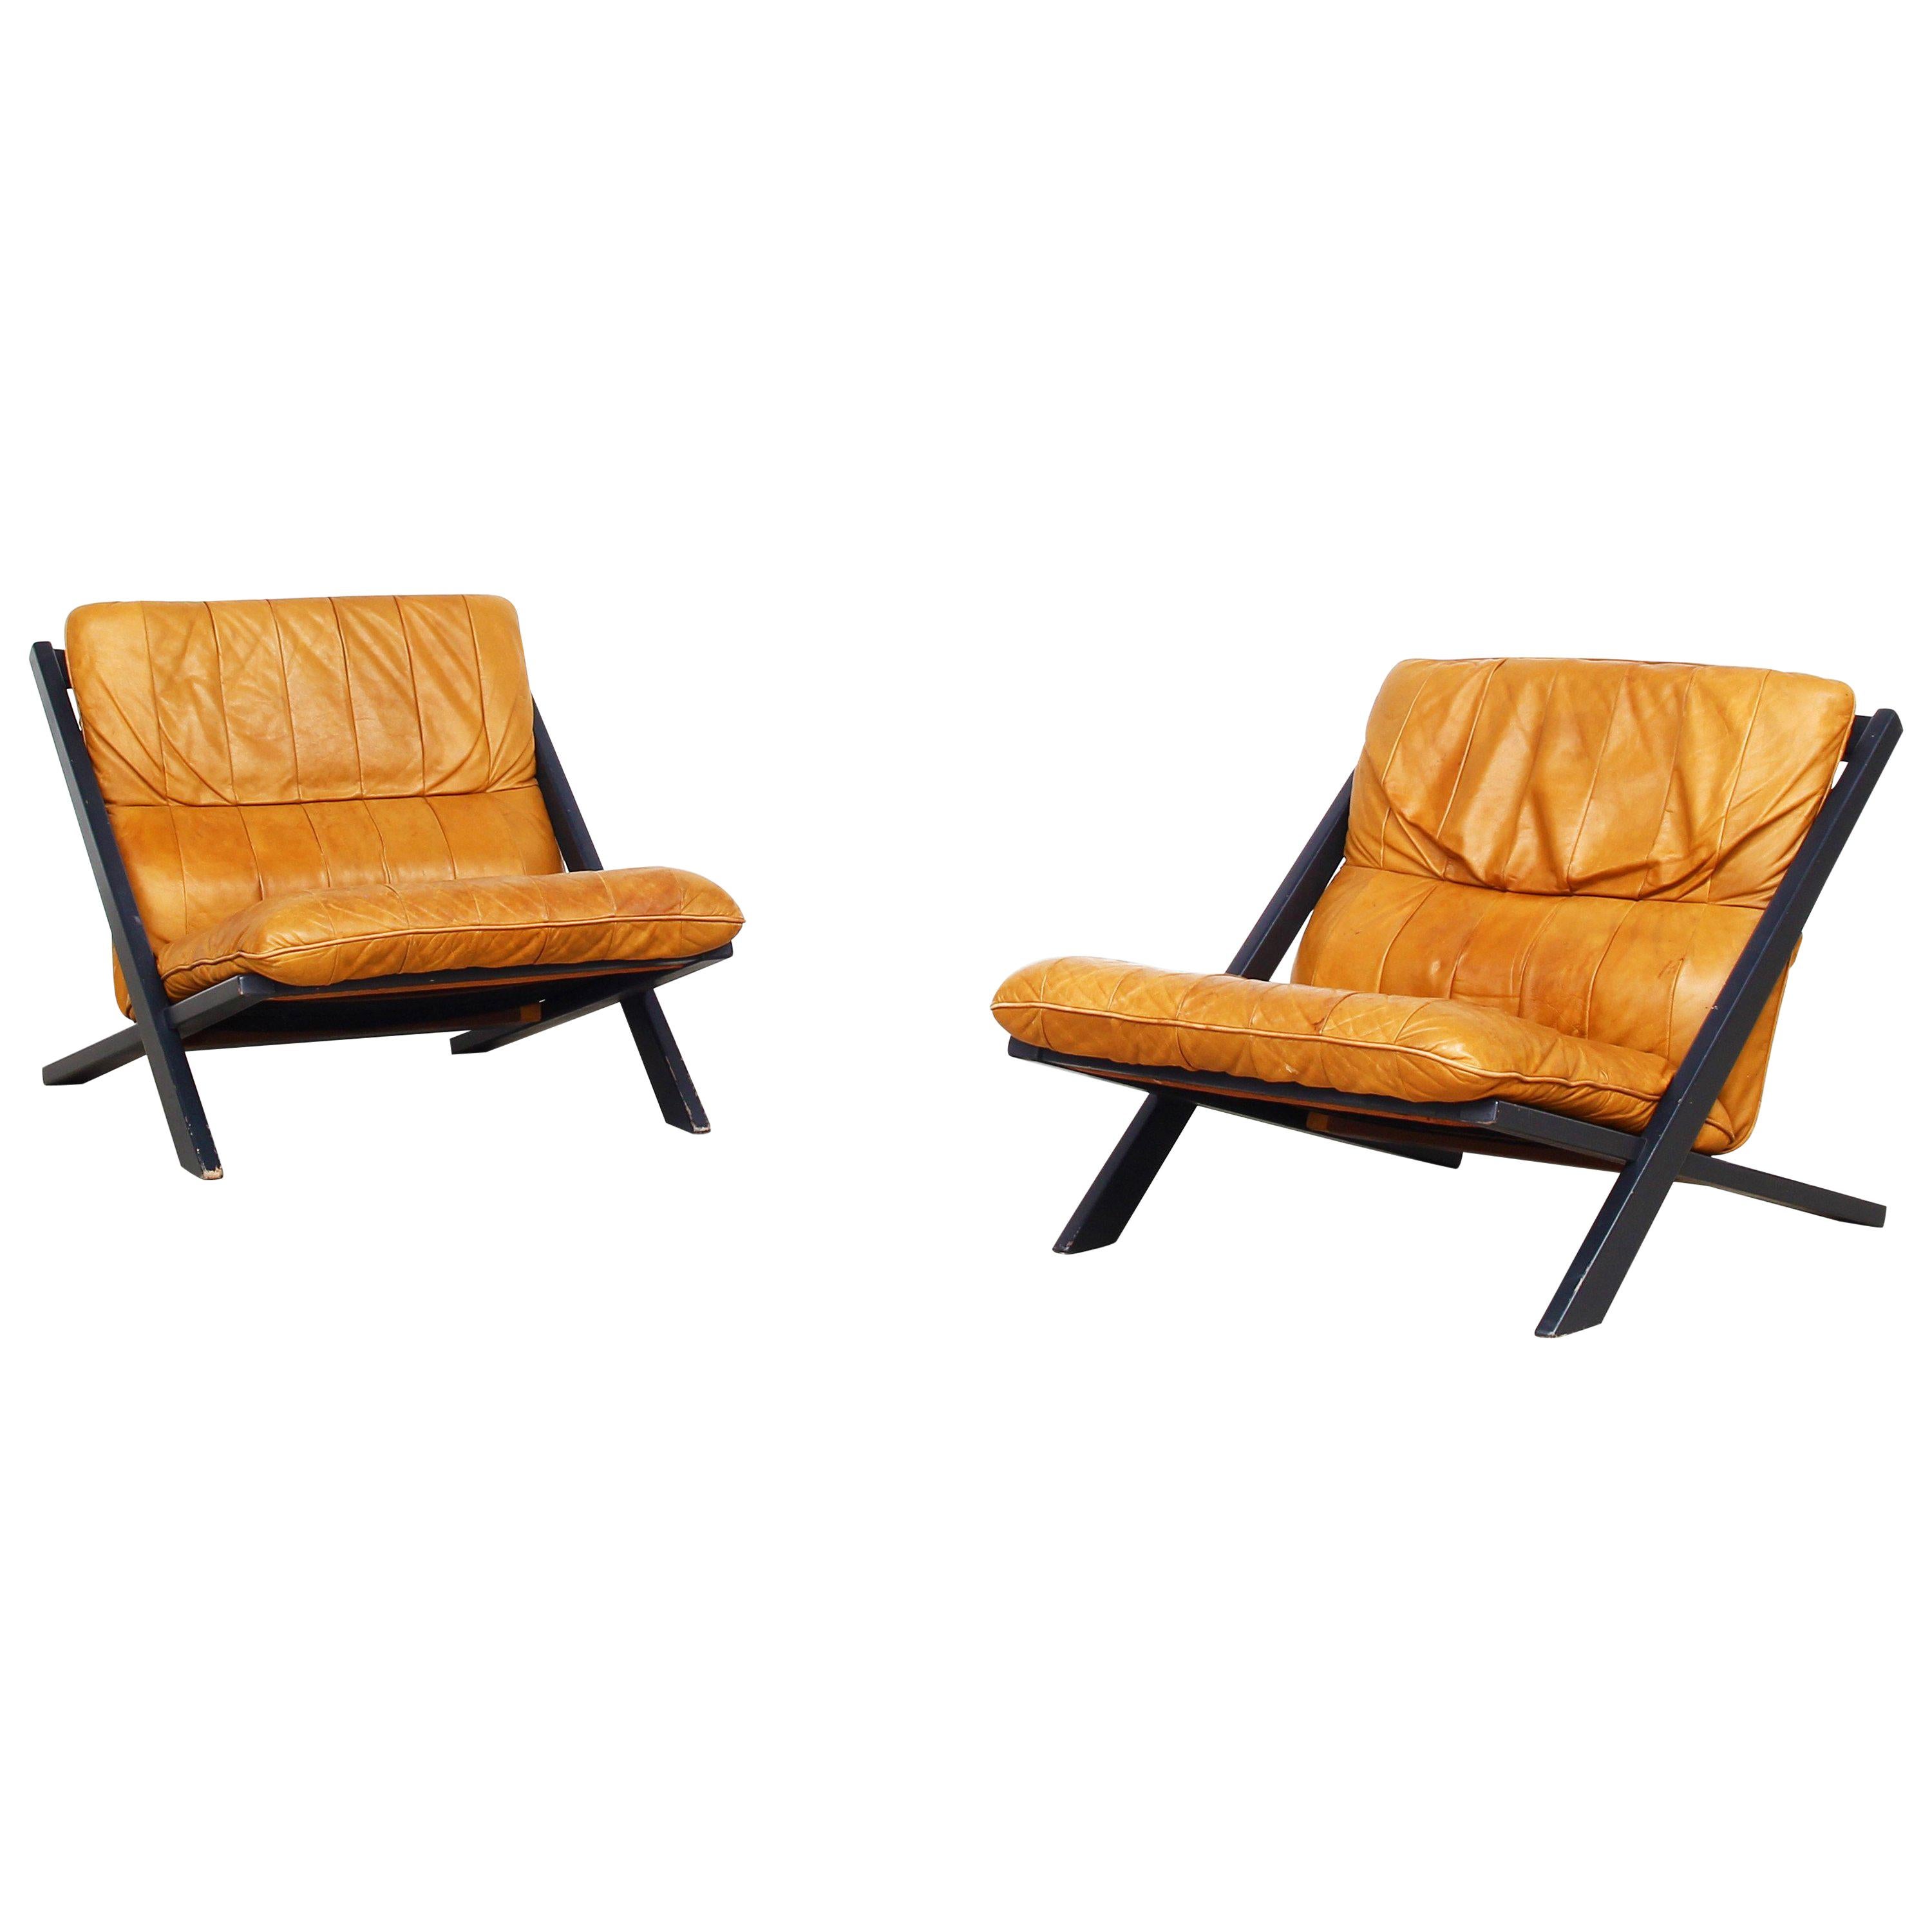 Pair of Lounge Chairs for De Sede by Ueli Berger, 1970s, Switzerland